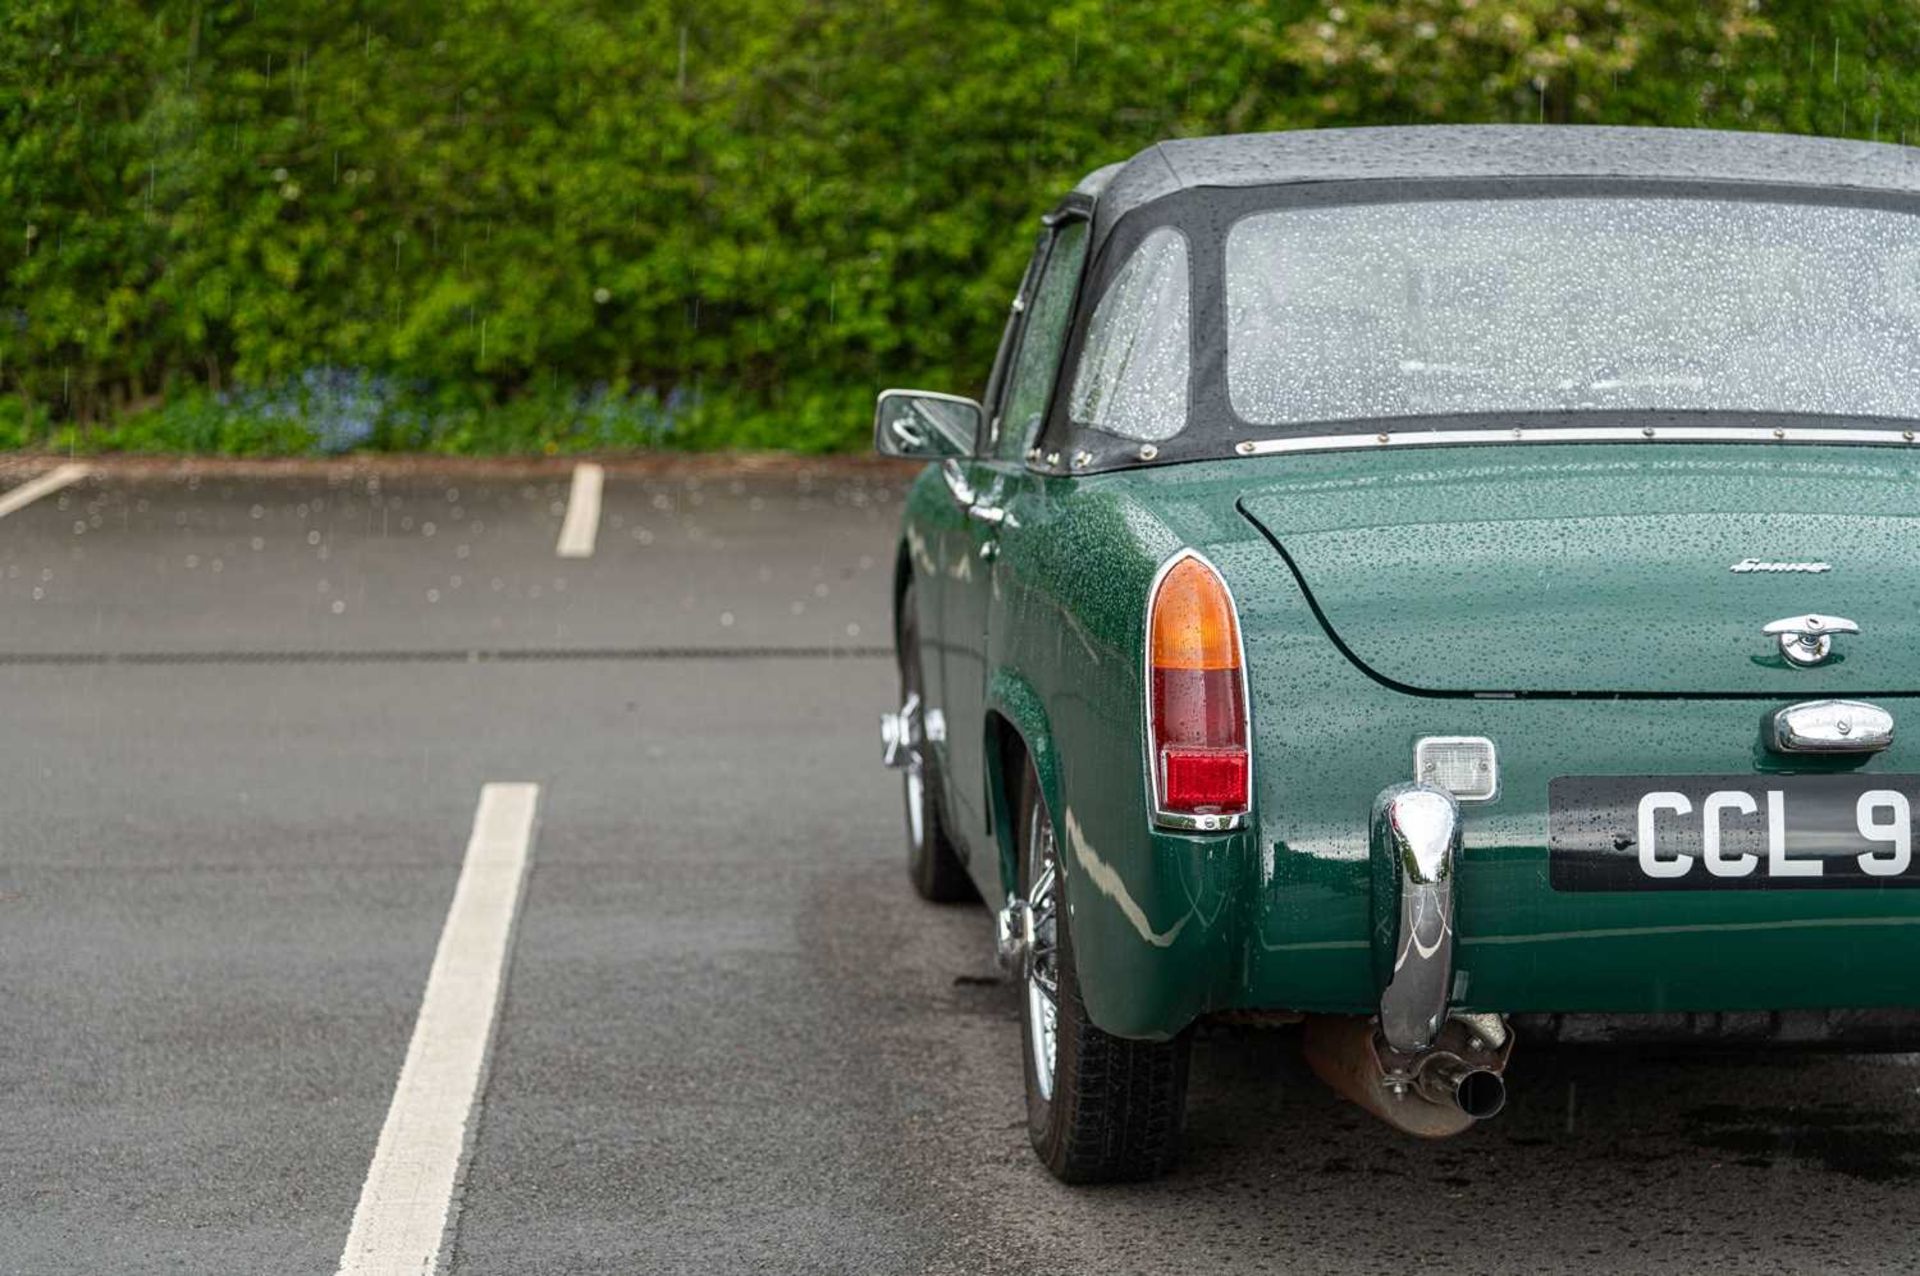 1965 Austin-Healey Sprite Formerly the property of British Formula One racing driver David Piper - Image 9 of 71